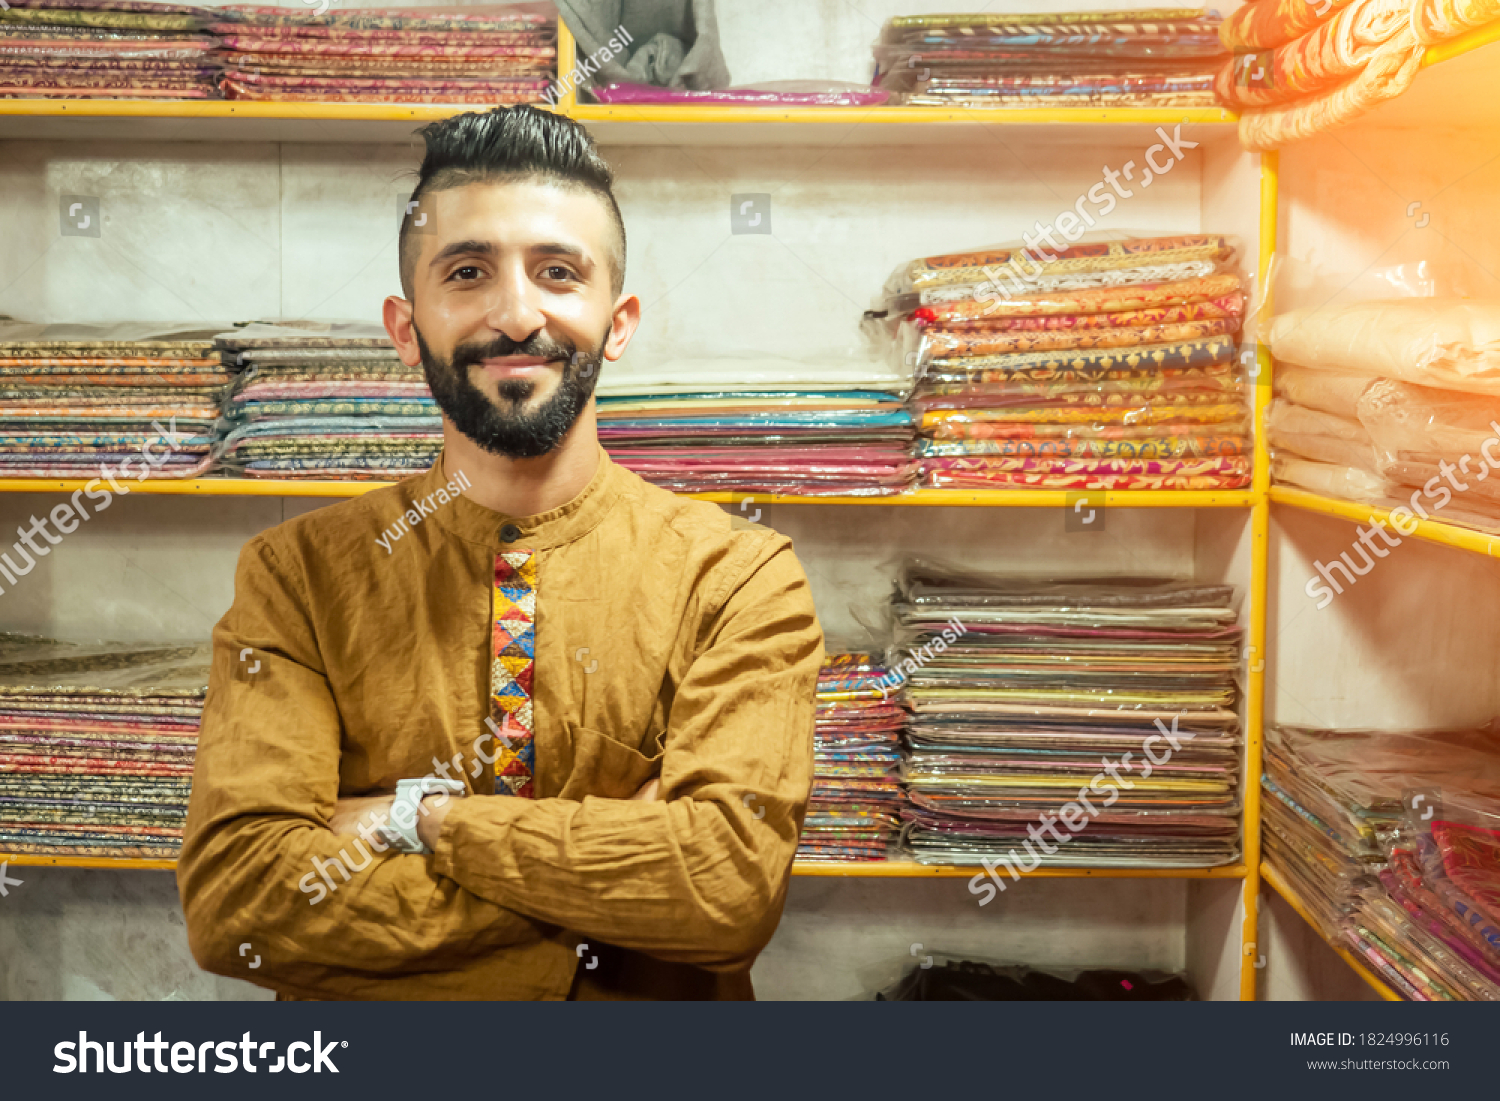 small shop owner indian man selling shawls at his store #1824996116